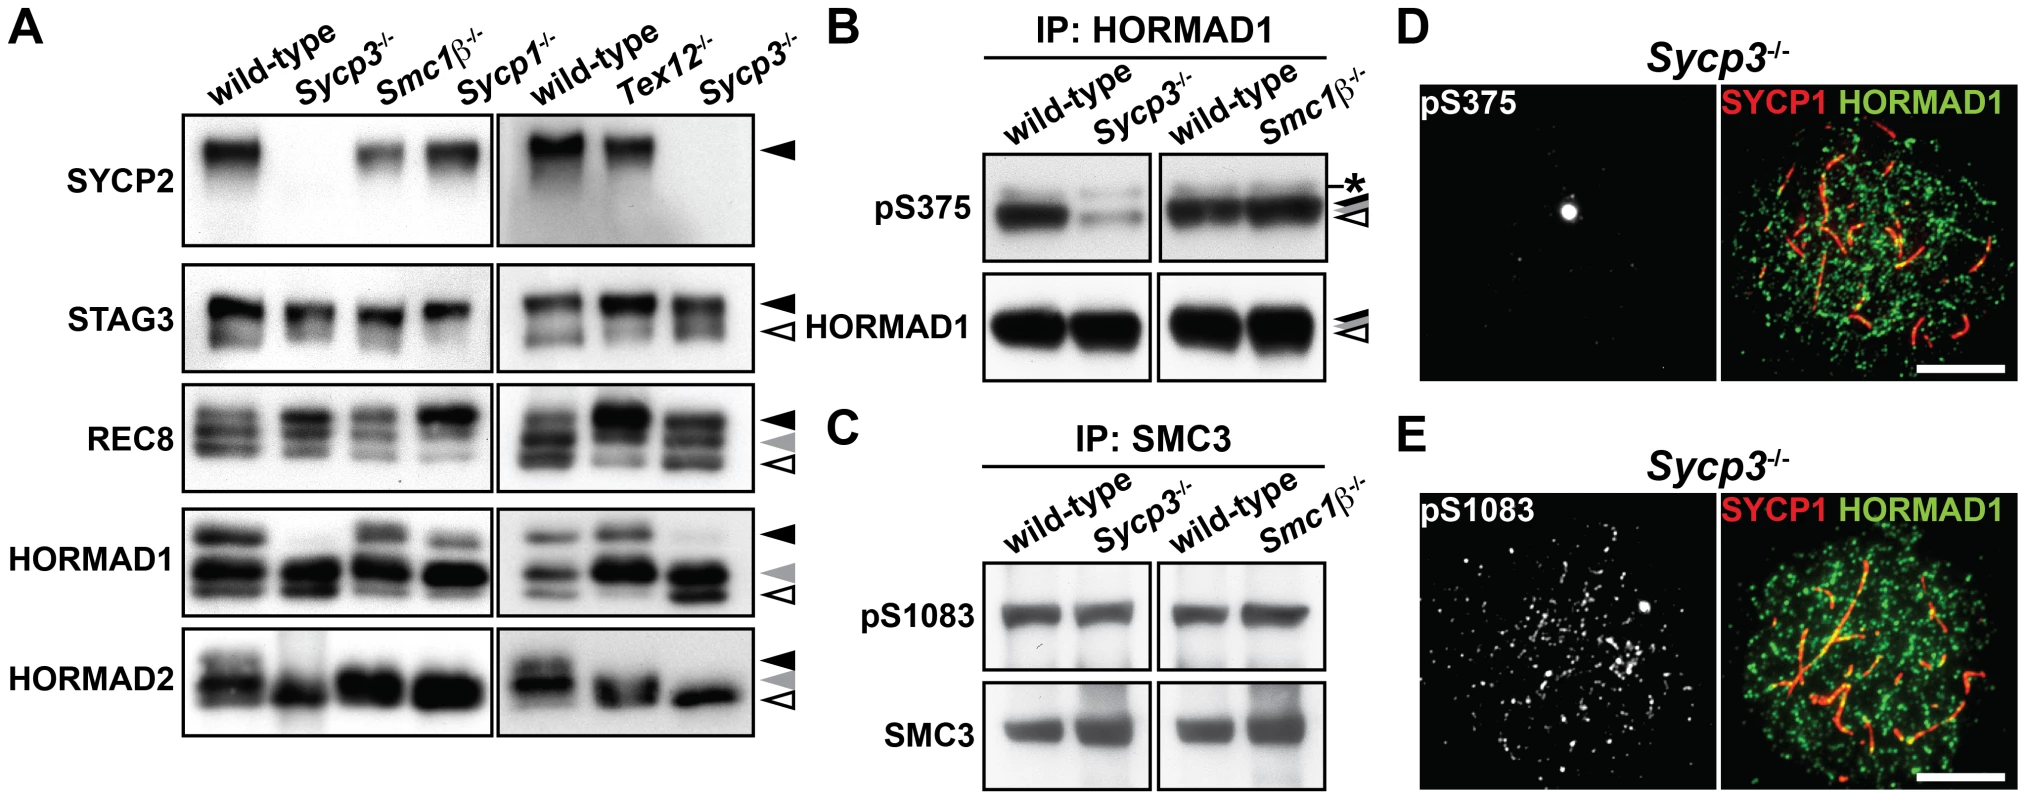 Phosphorylation of HORMAD1 is reduced in the absence of SYCP3.